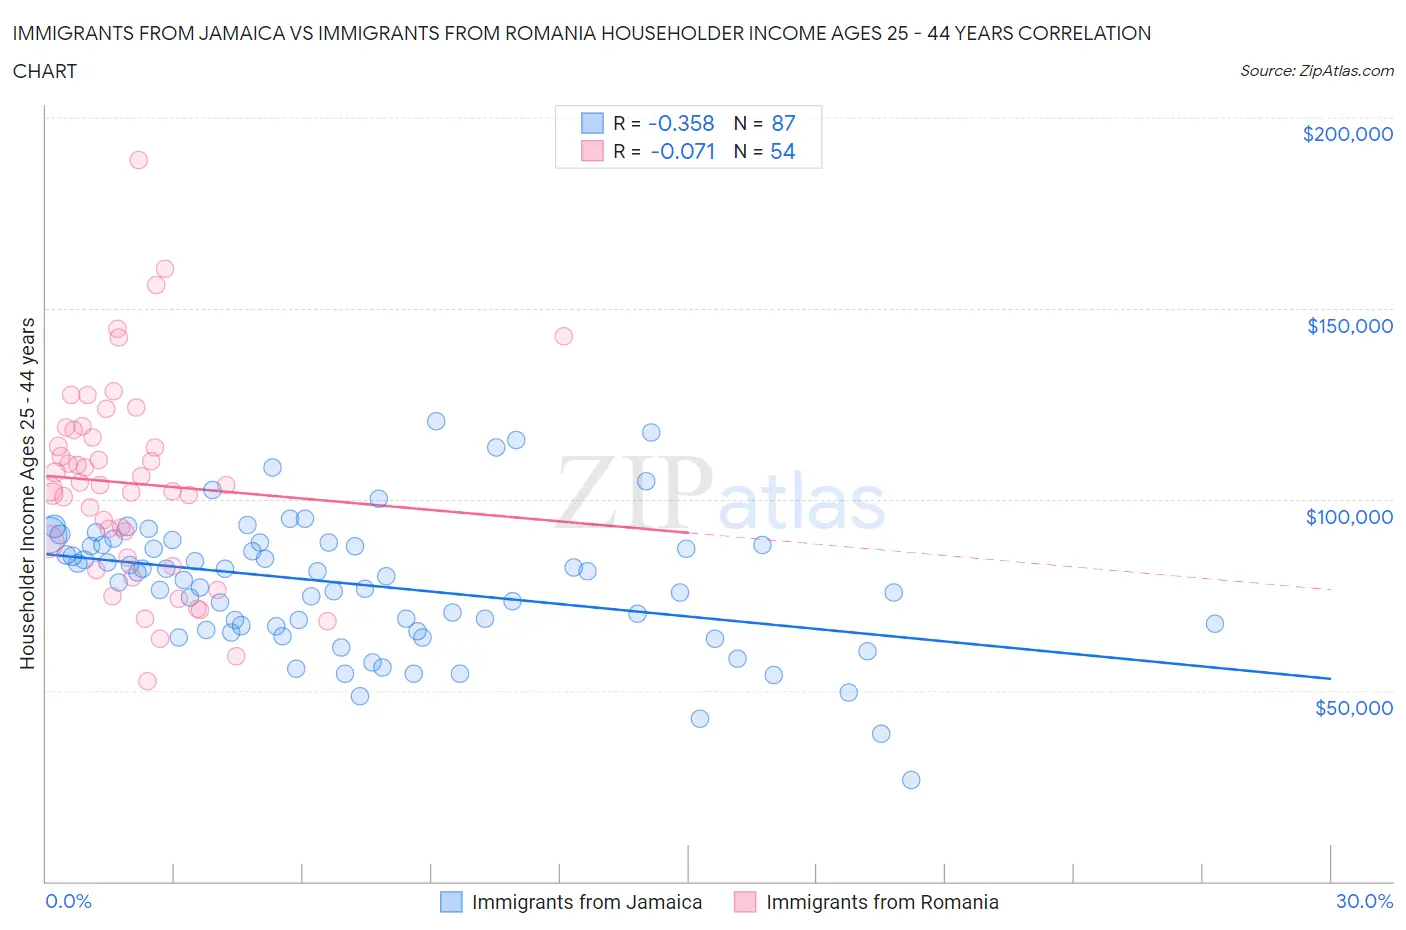 Immigrants from Jamaica vs Immigrants from Romania Householder Income Ages 25 - 44 years